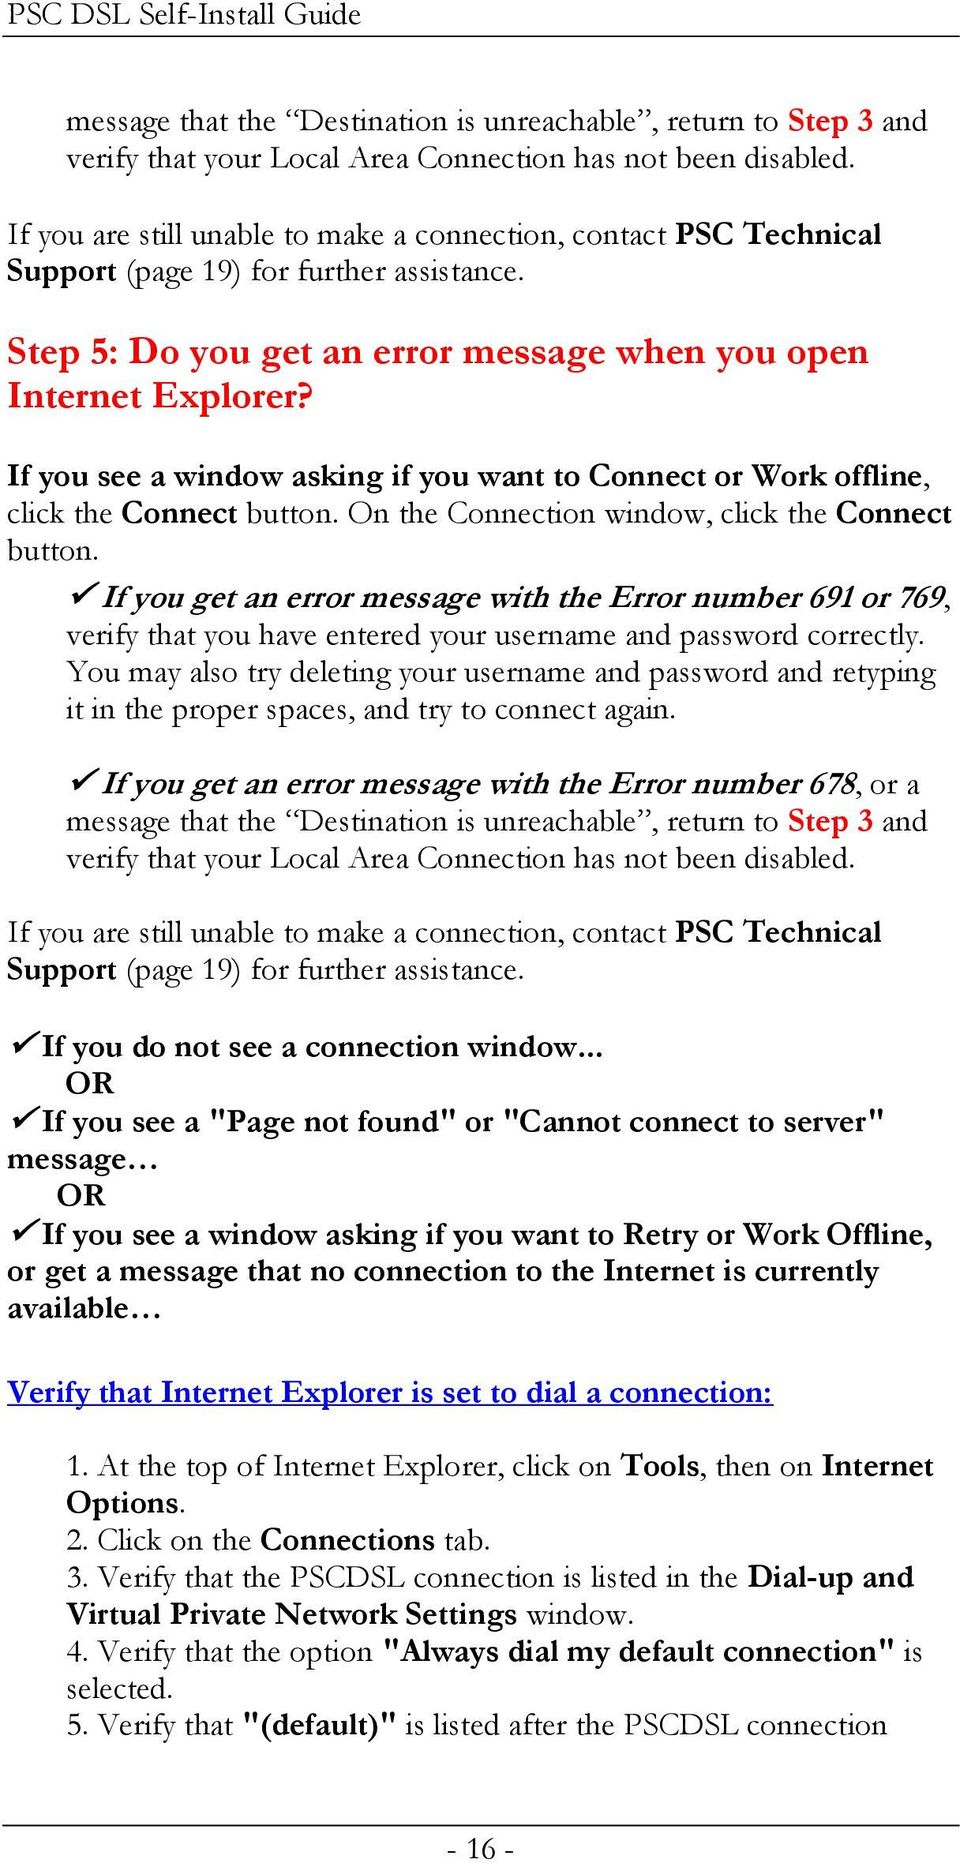 If you see a window asking if you want to Connect or Work offline, click the Connect button. On the Connection window, click the Connect button.